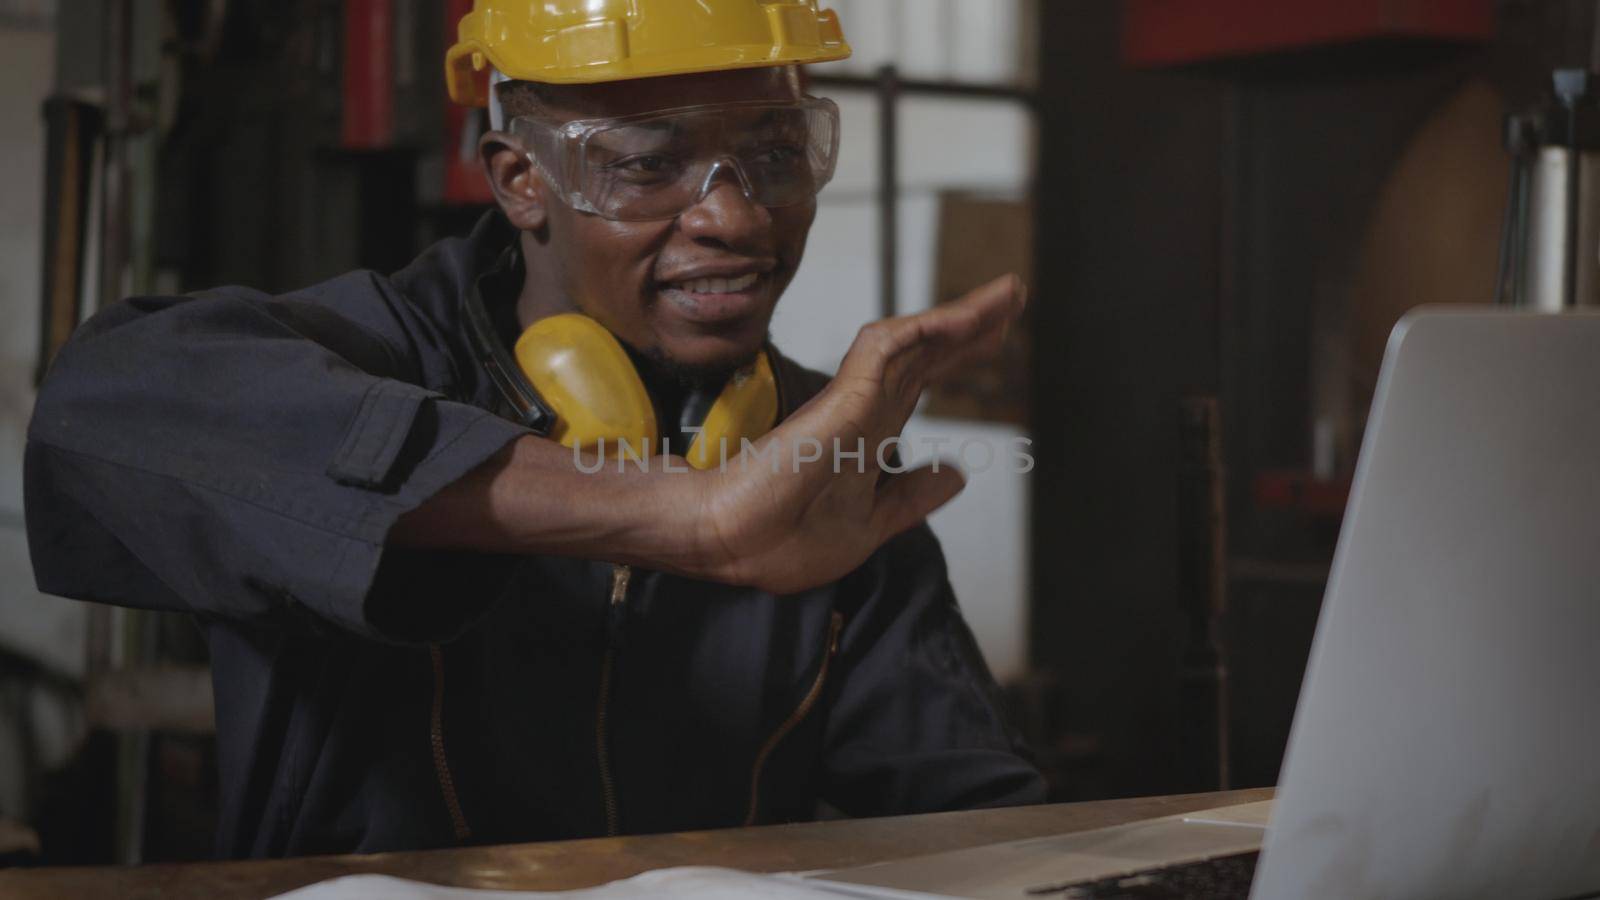 Social distance group of industrial worker, American industrial black young worker man with yellow helmet having teleconference or video conference calls meeting remotely and discussion about project